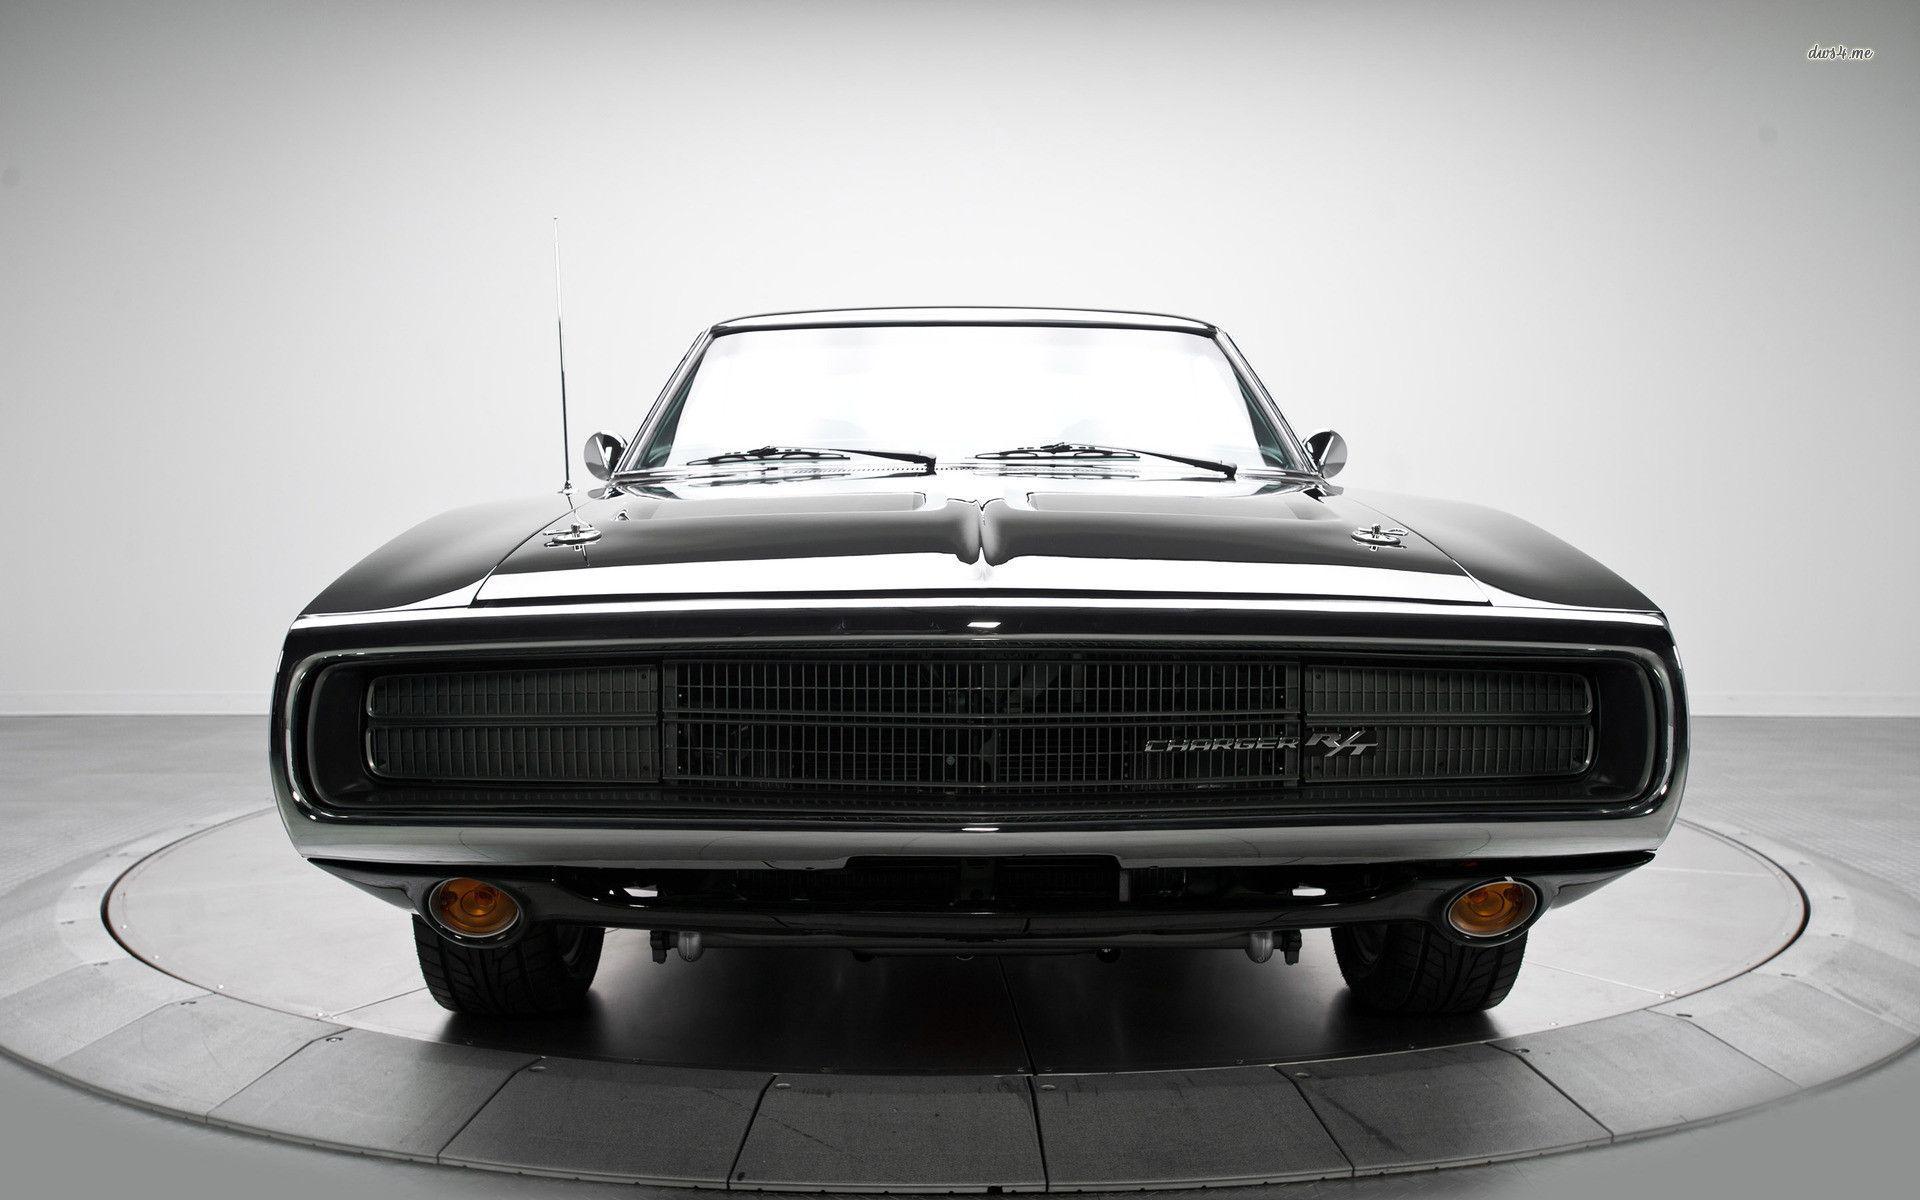 Quality Dodge Charger Wallpaper Widescreen